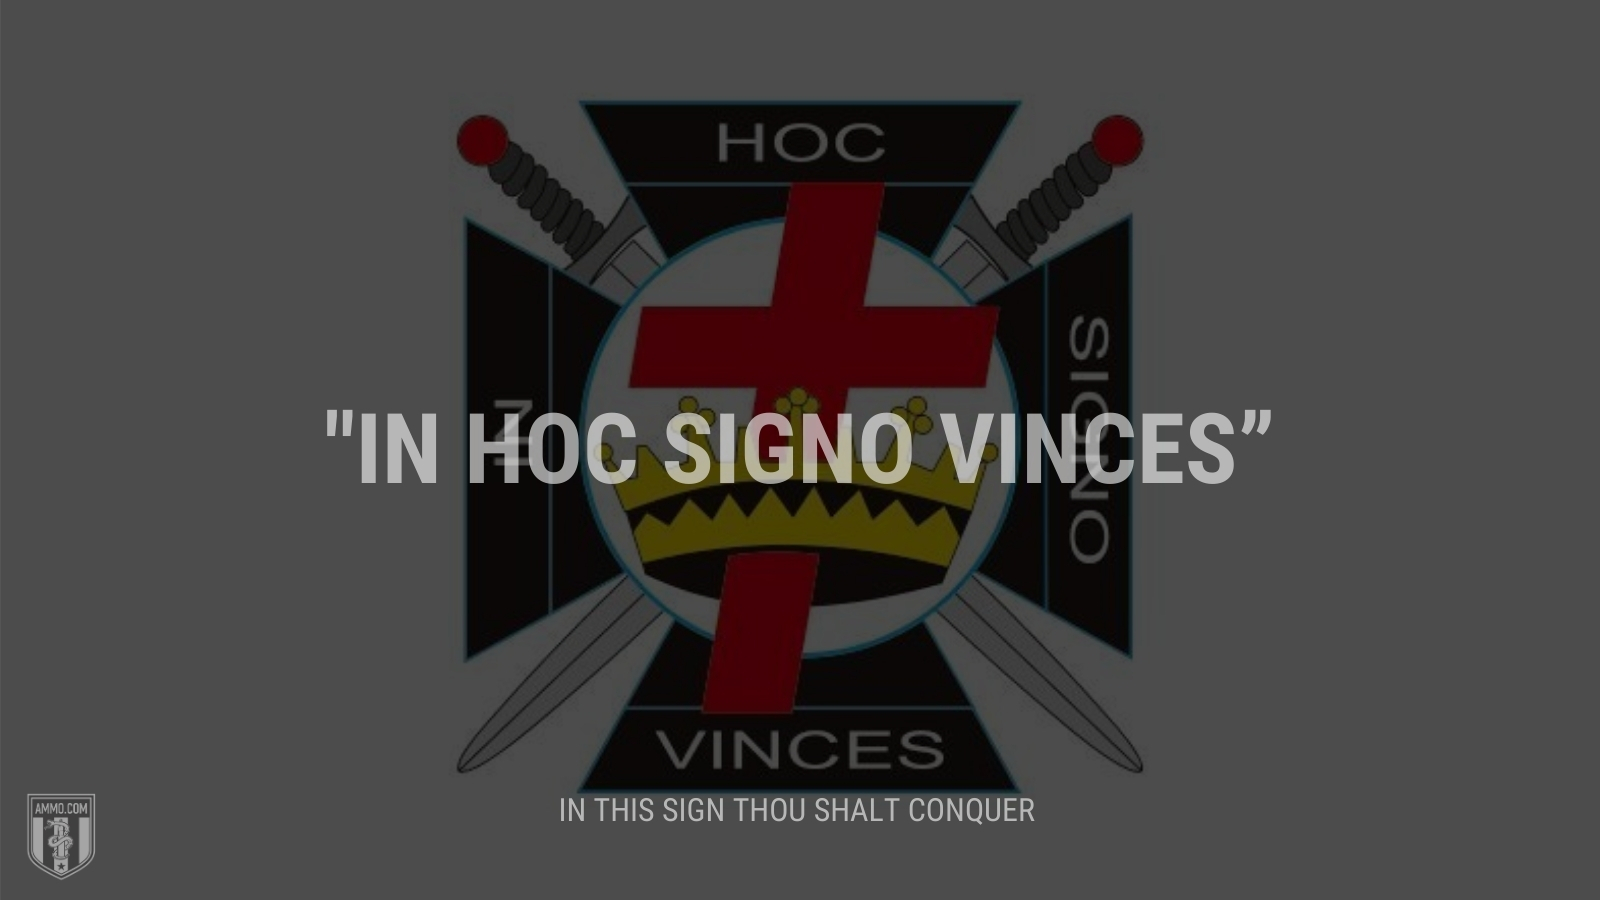 “In hoc signo vinces” - In this sign thou shalt conquer